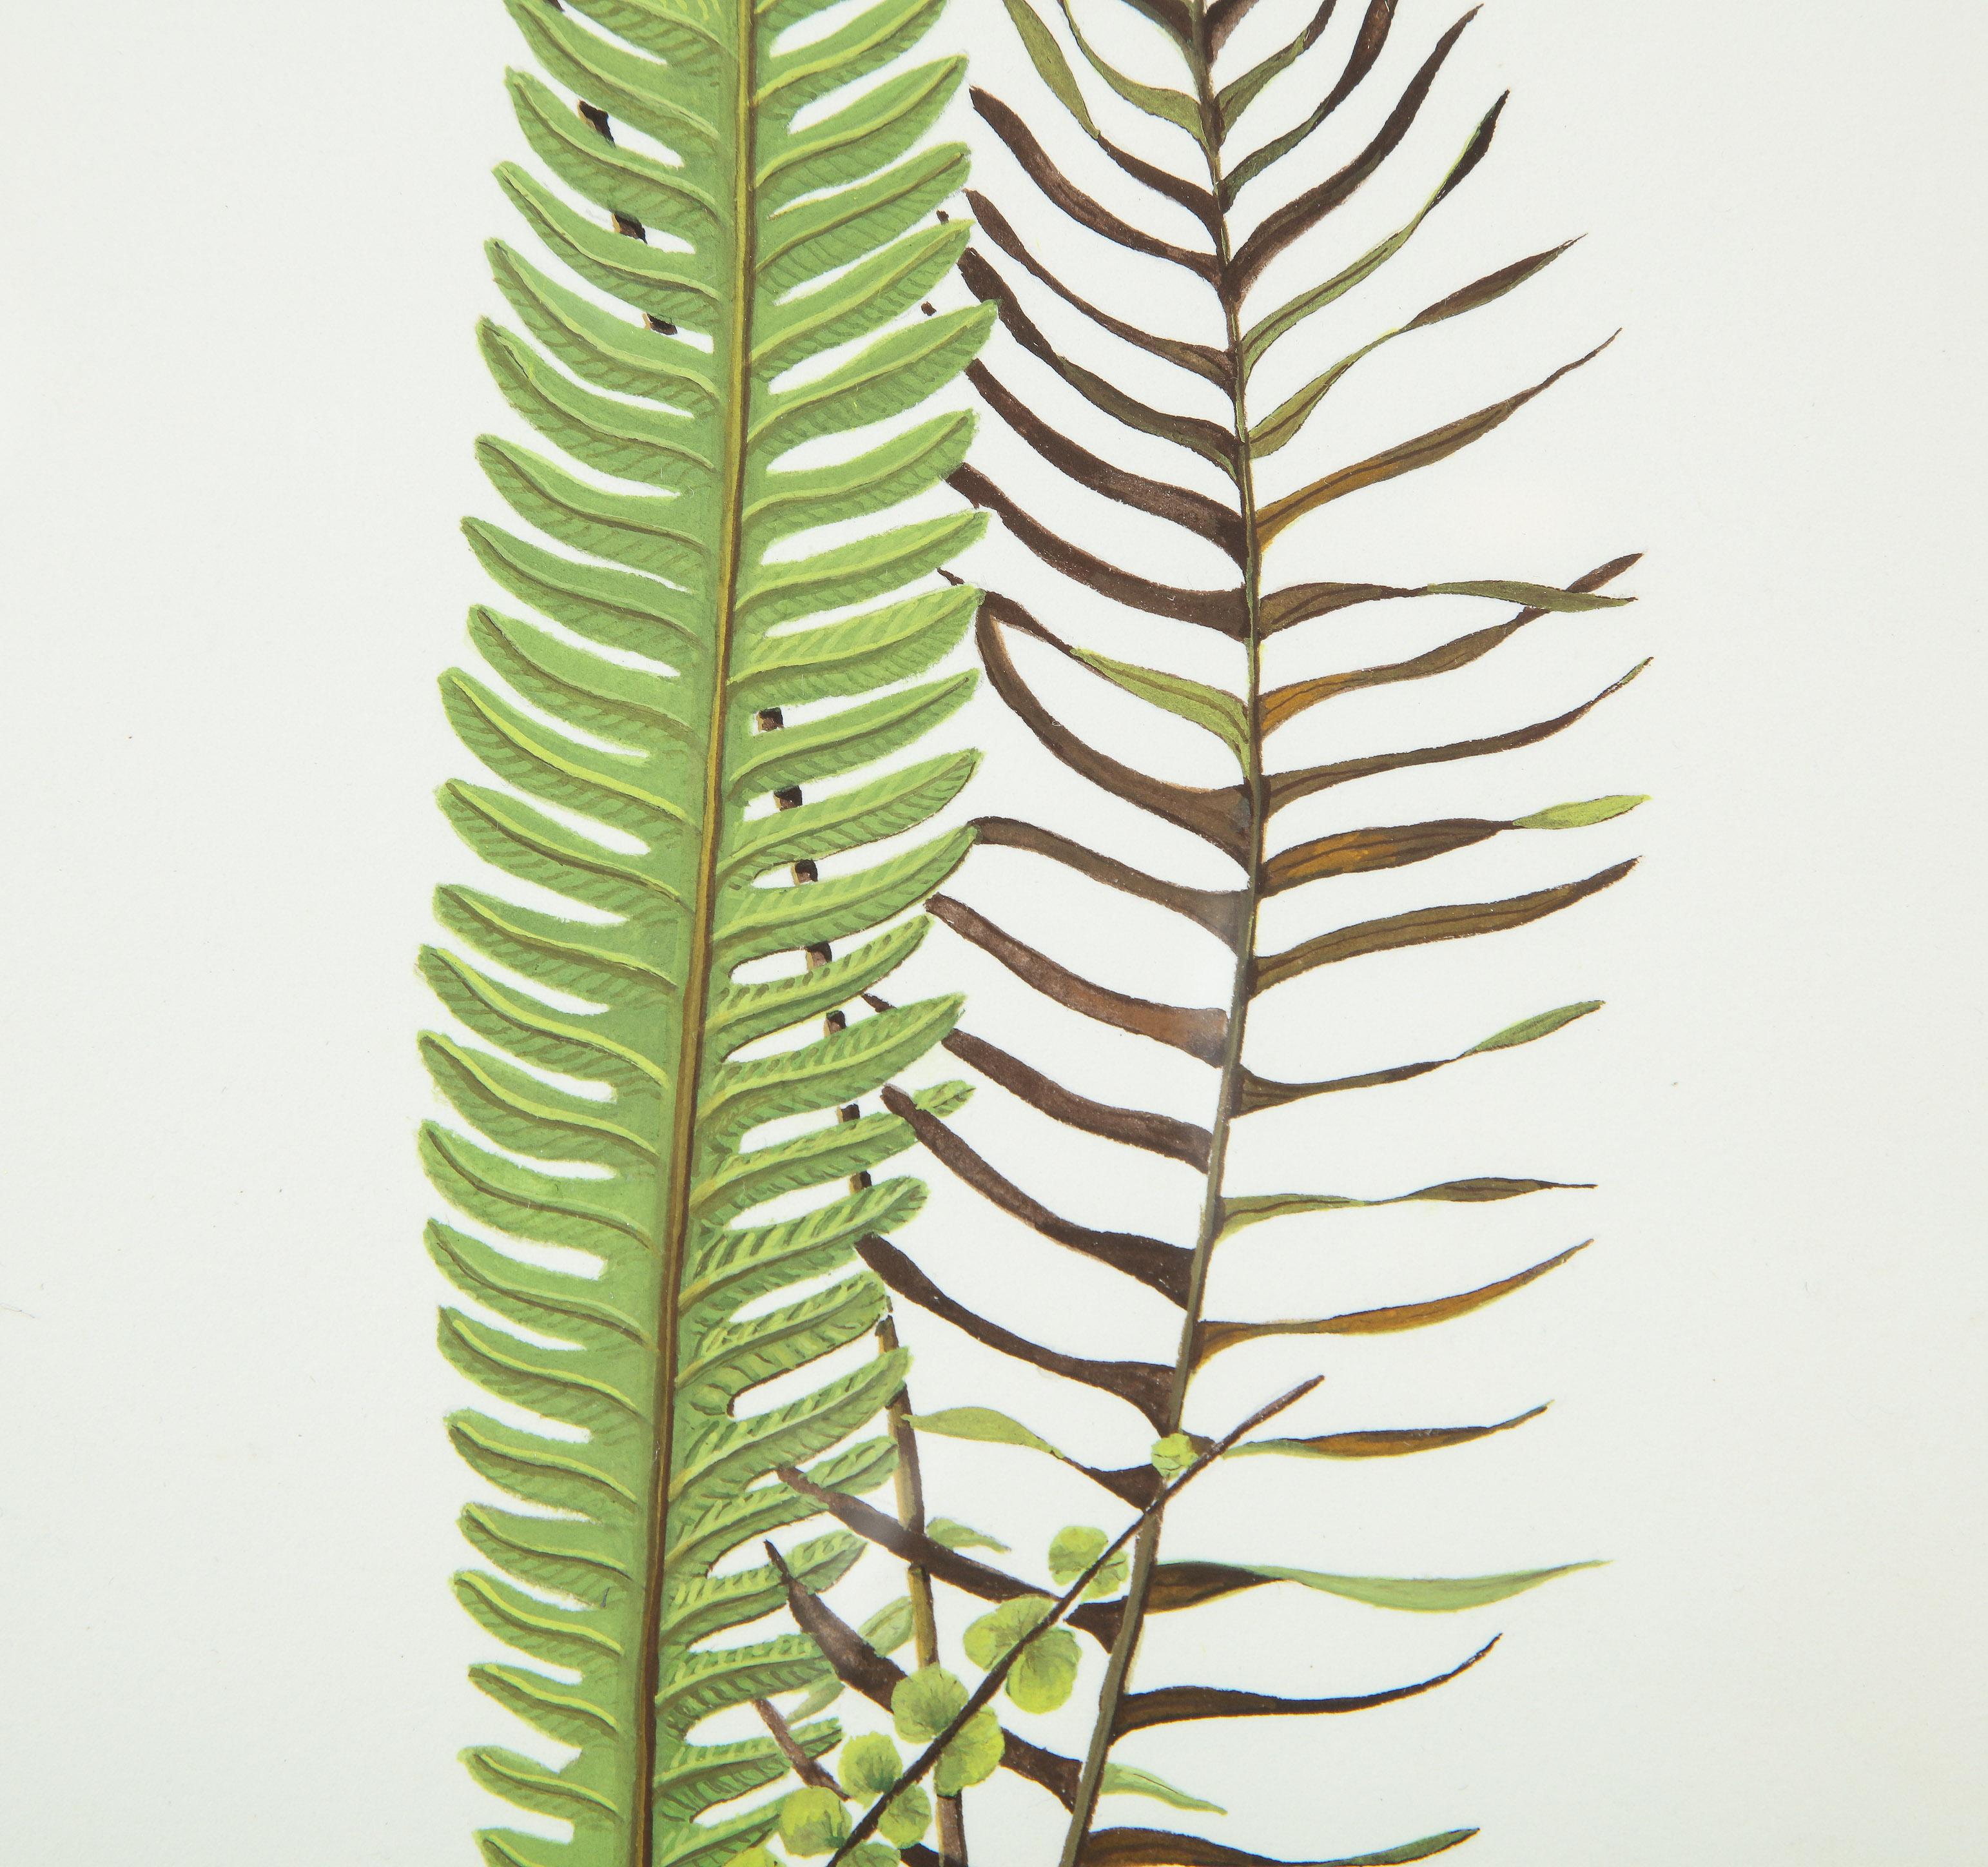 Botanical specimen of a fern by East Hampton artist Abigail Vogel. Note dimensions are framed.   

Abigail Vogel knew she was an artist from the beginning. By age four she was drawing and painting constantly, and her devotion to the arts has been